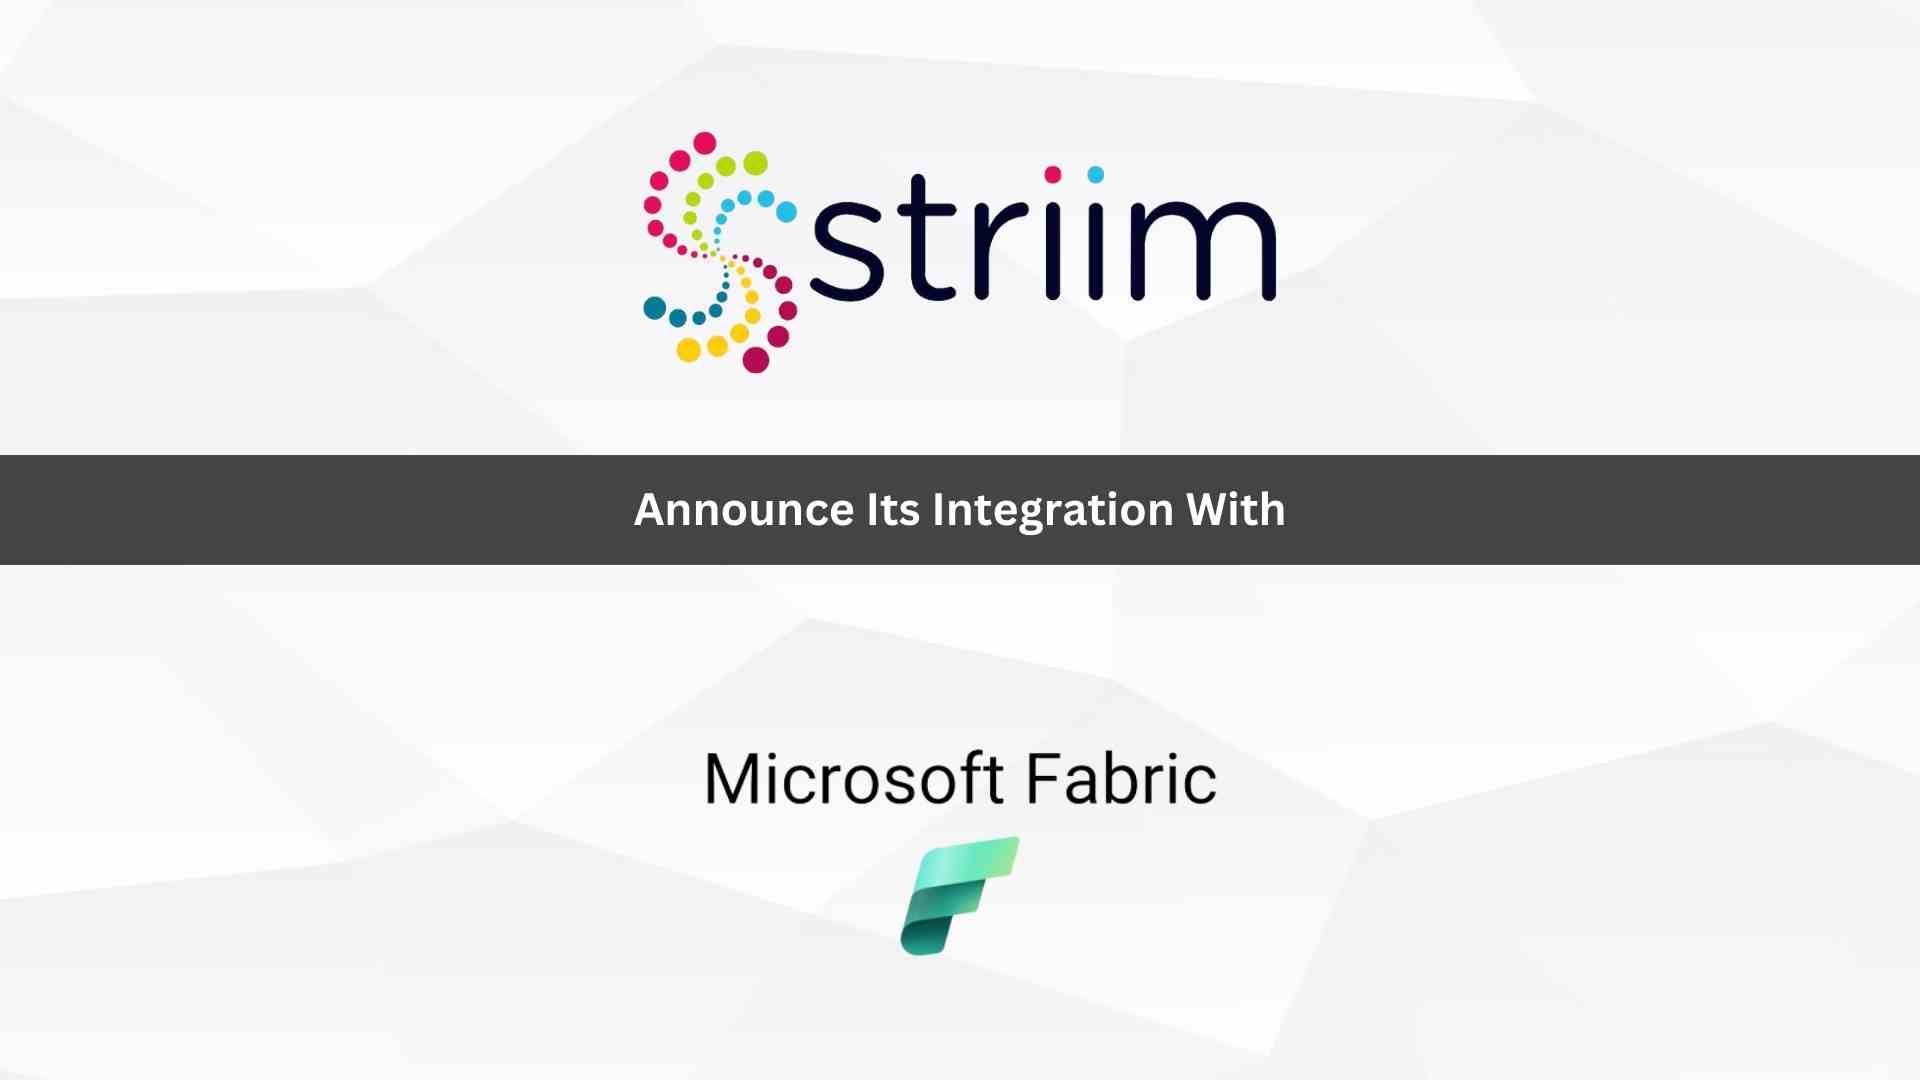 Striim Integrates with Microsoft Fabric to Deliver Real-Time Data Streaming Innovation for Analytics and AI